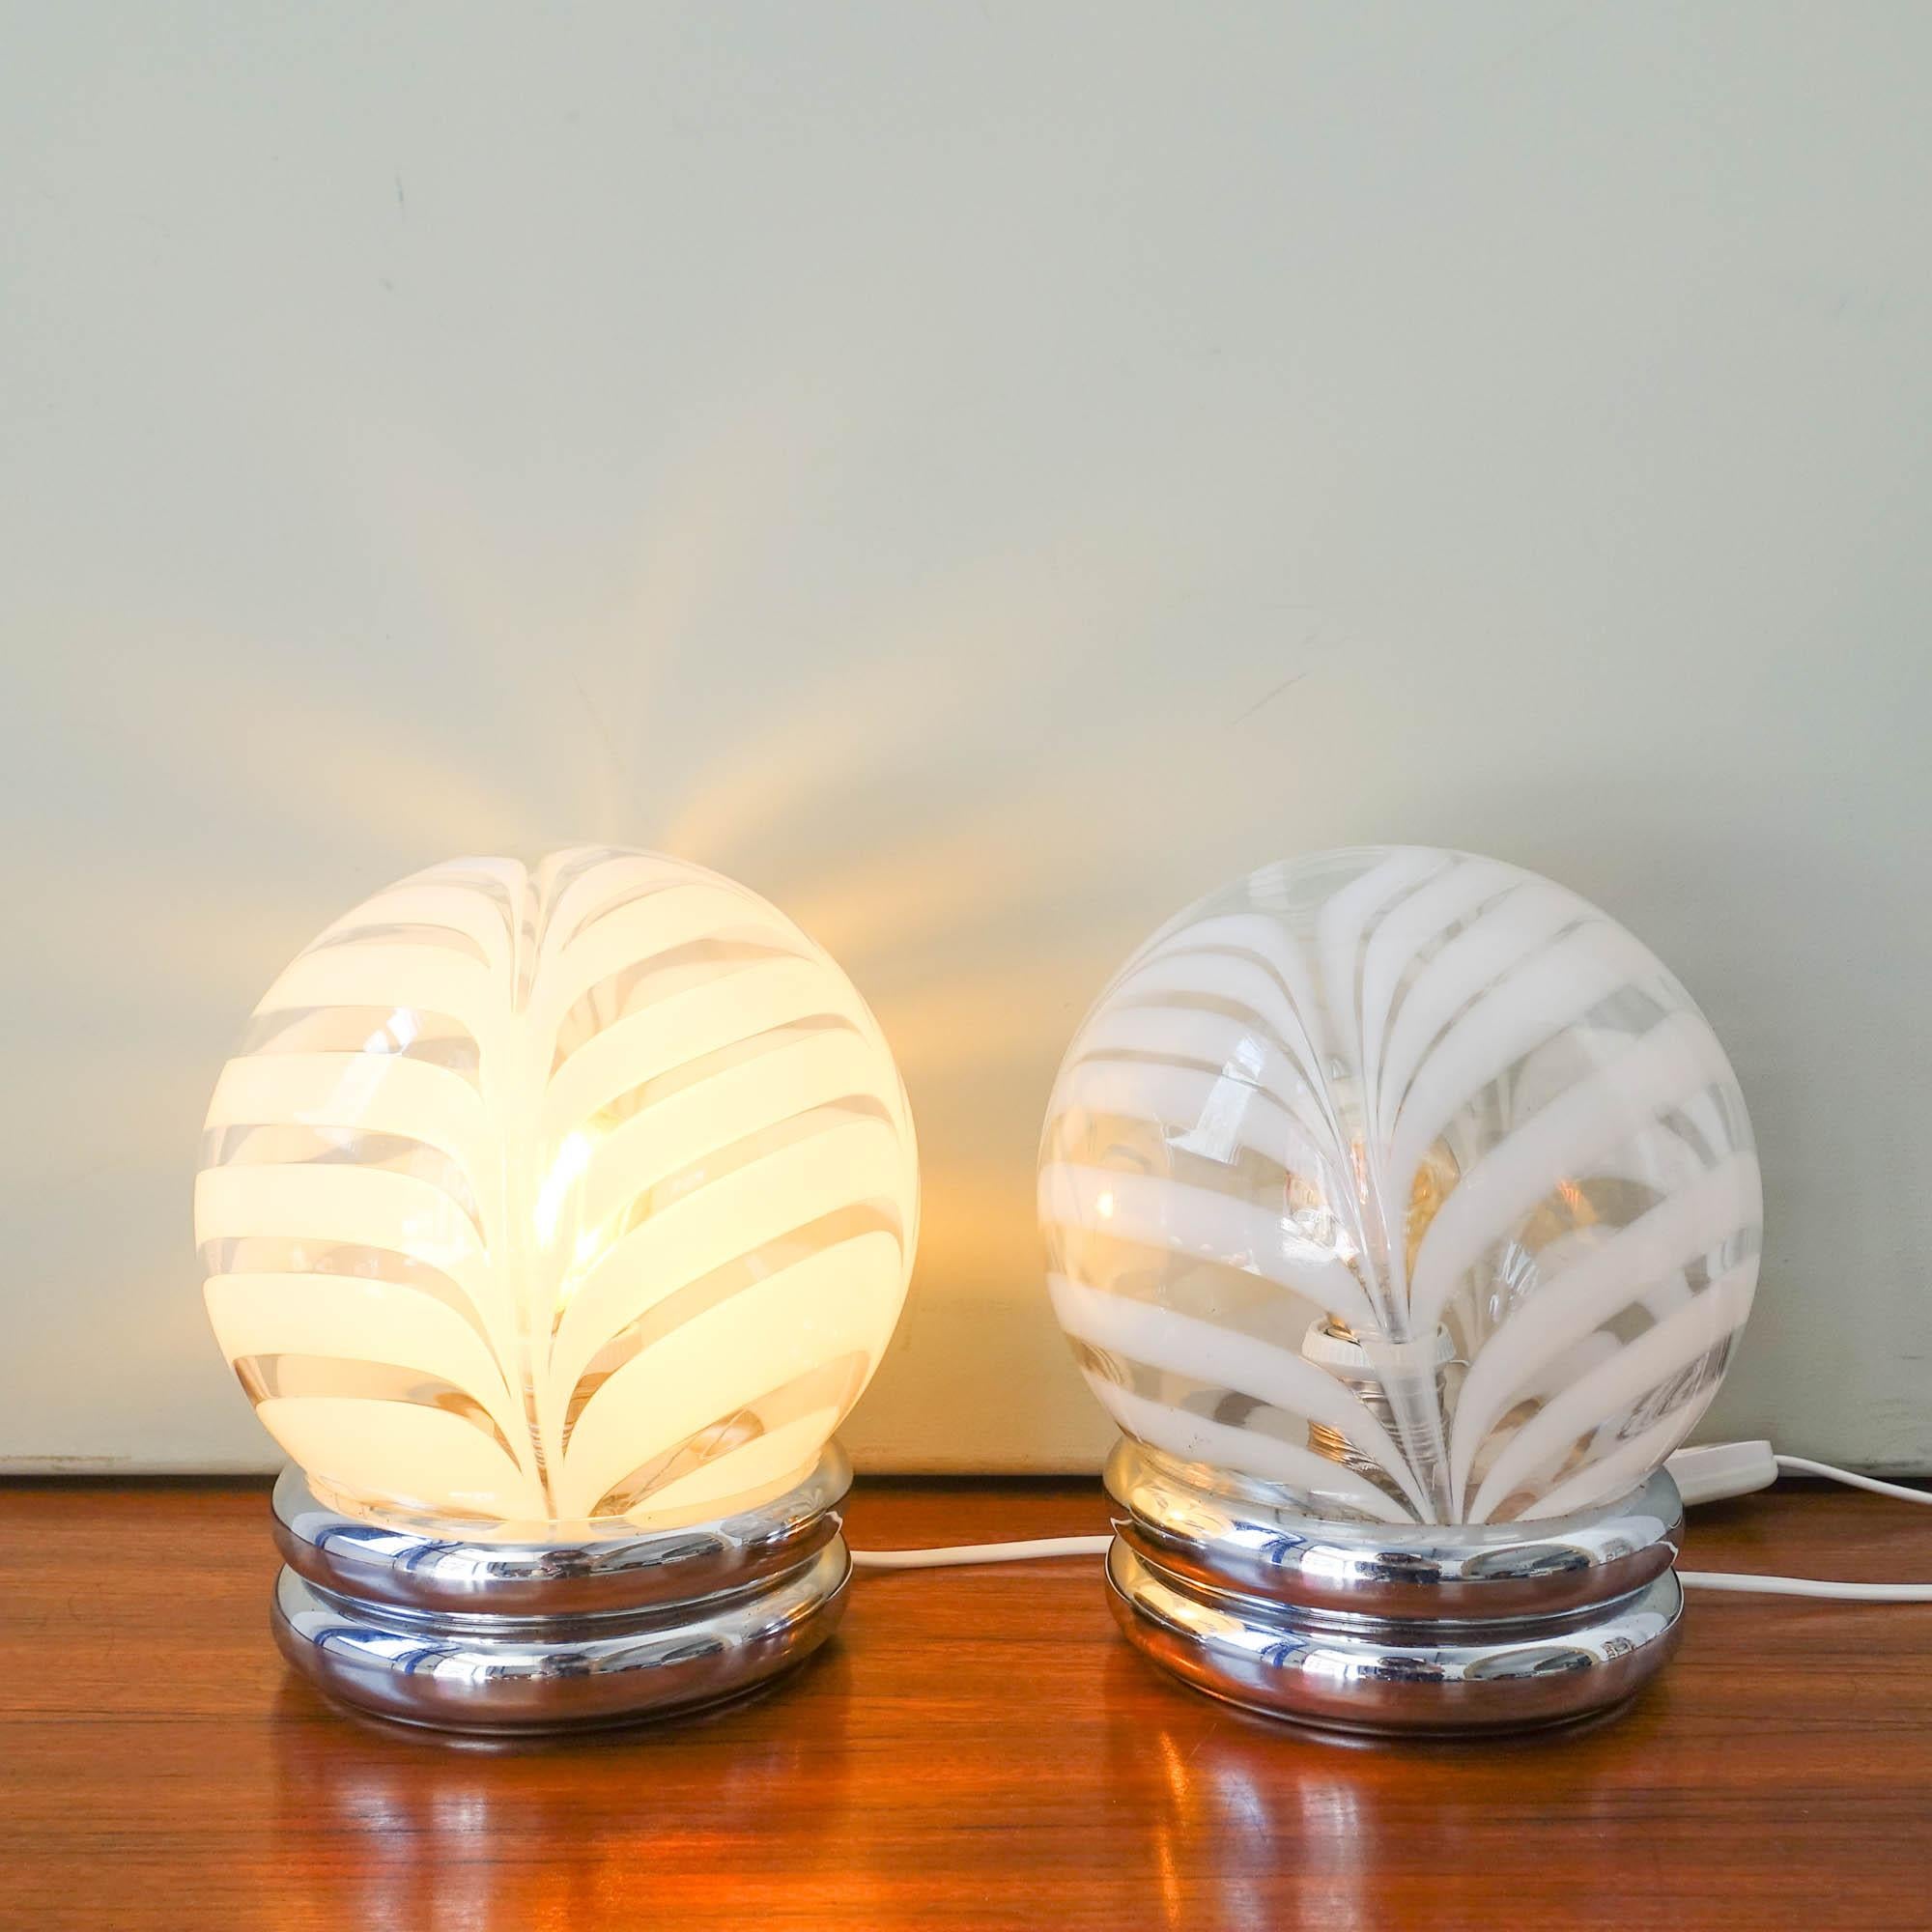 This pair was designed and produced by Marinha Grande Glass Factory, in Portugal during the 1970's. Each lamp features a chrome base where sets a blown clear and white glass globes from Marinha Grande
The glass is transparent with milk color swirl